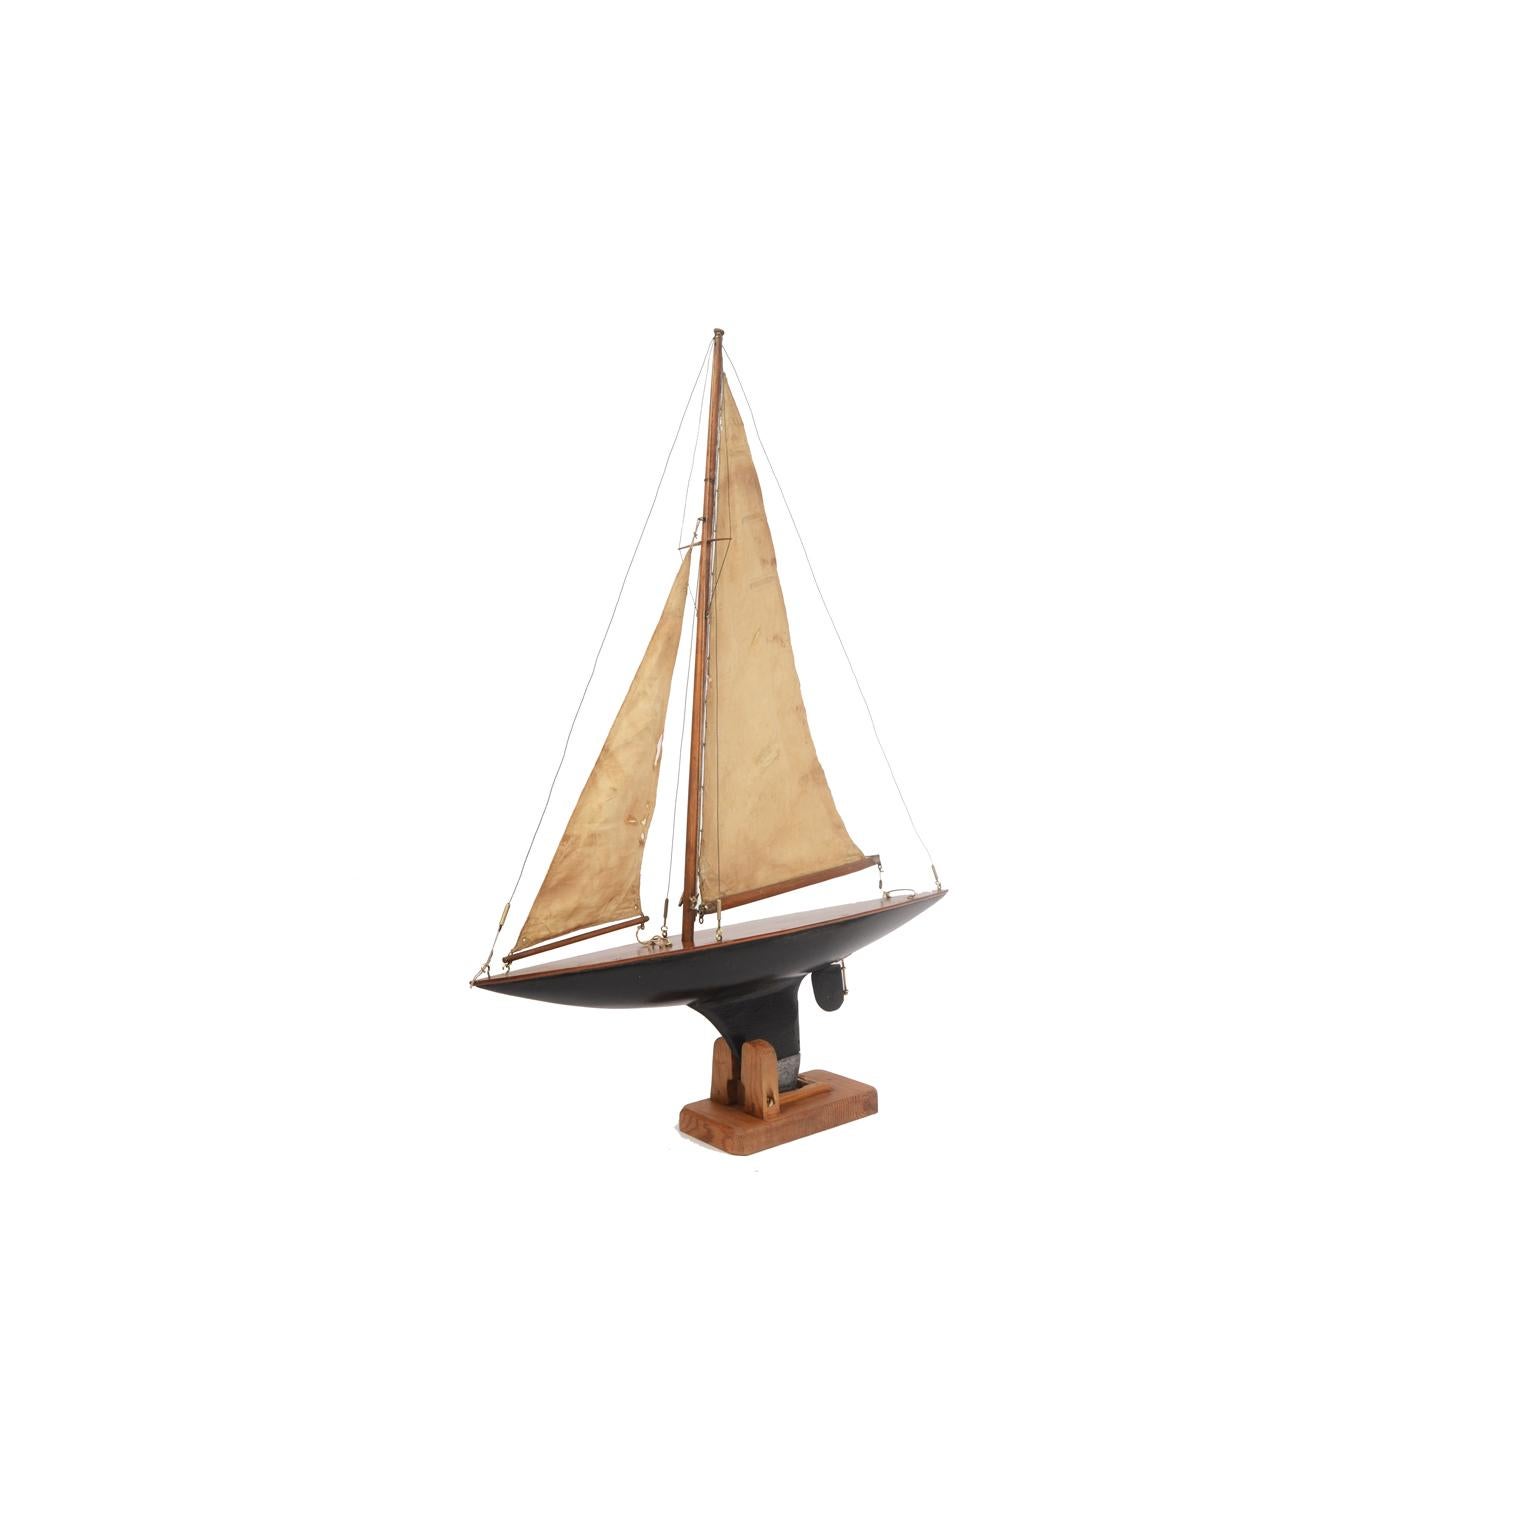 Pond model made in the early 1900s of a yacht used to navigate lakes. 
Original masts, rigging and sails, beautiful wooden hull with original paint, leaded keel and rudder, original custom made wooden support. 
Good condition, some tears in the